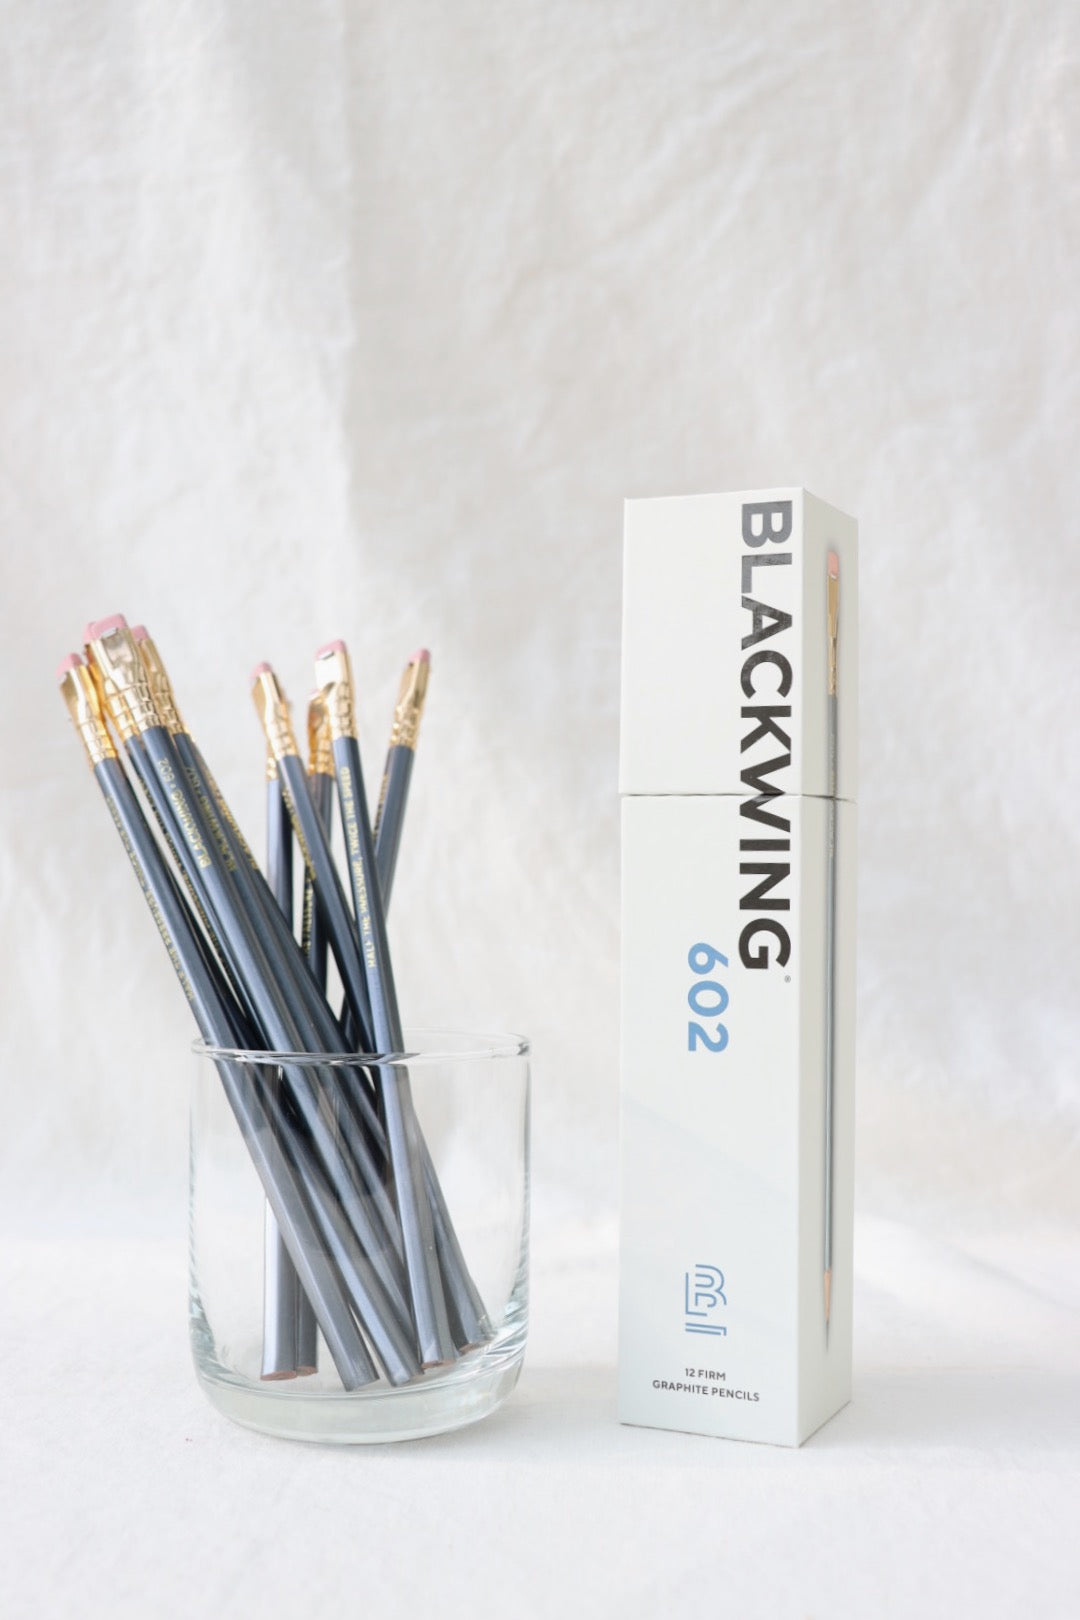 Boxed Blackwing 602